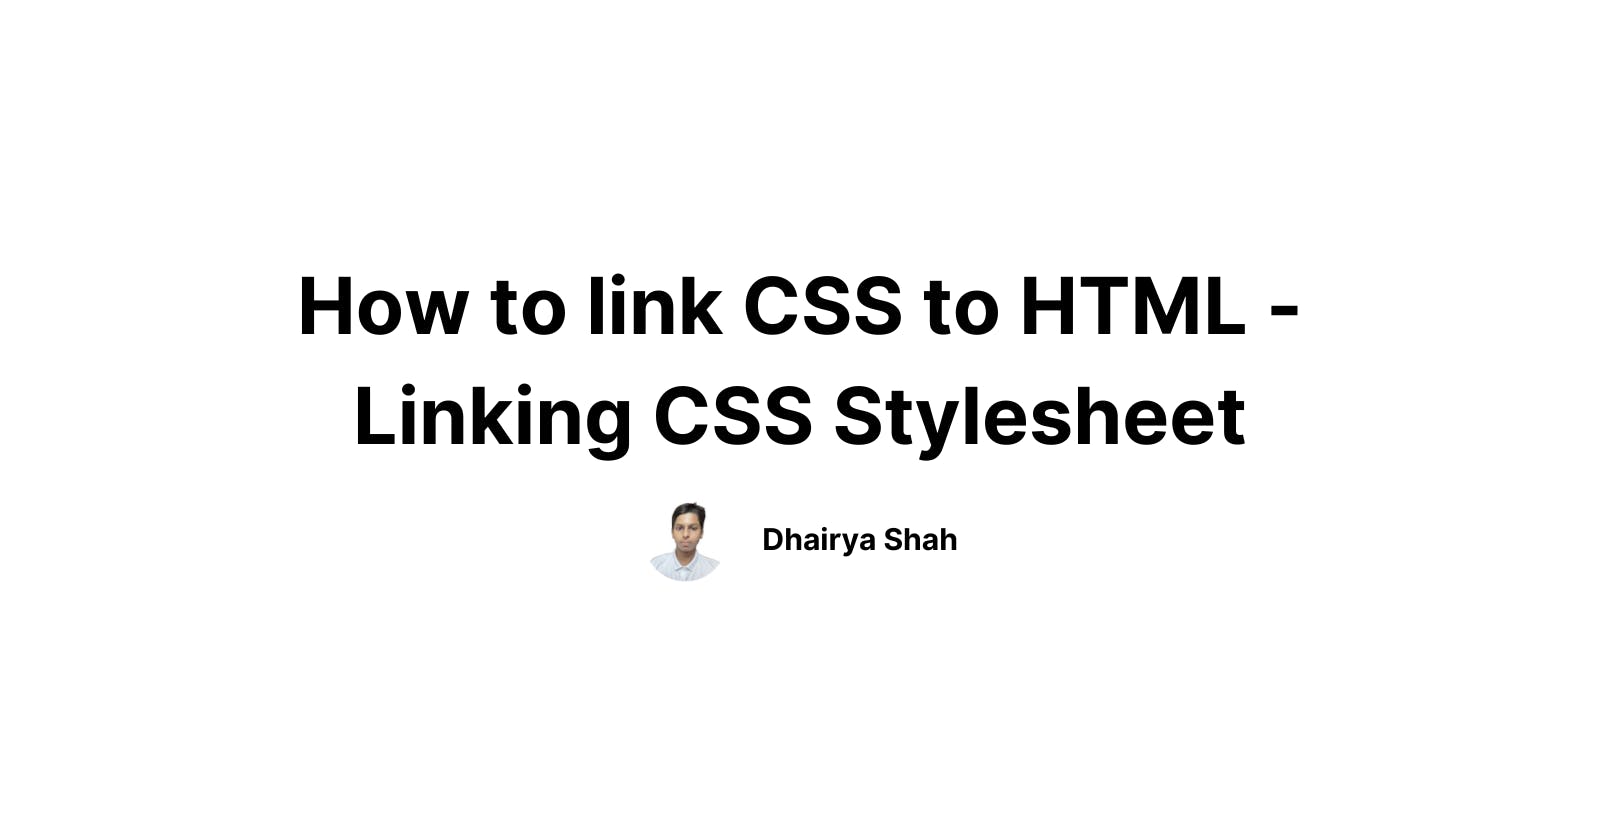 How to link CSS to HTML - Linking CSS Stylesheet